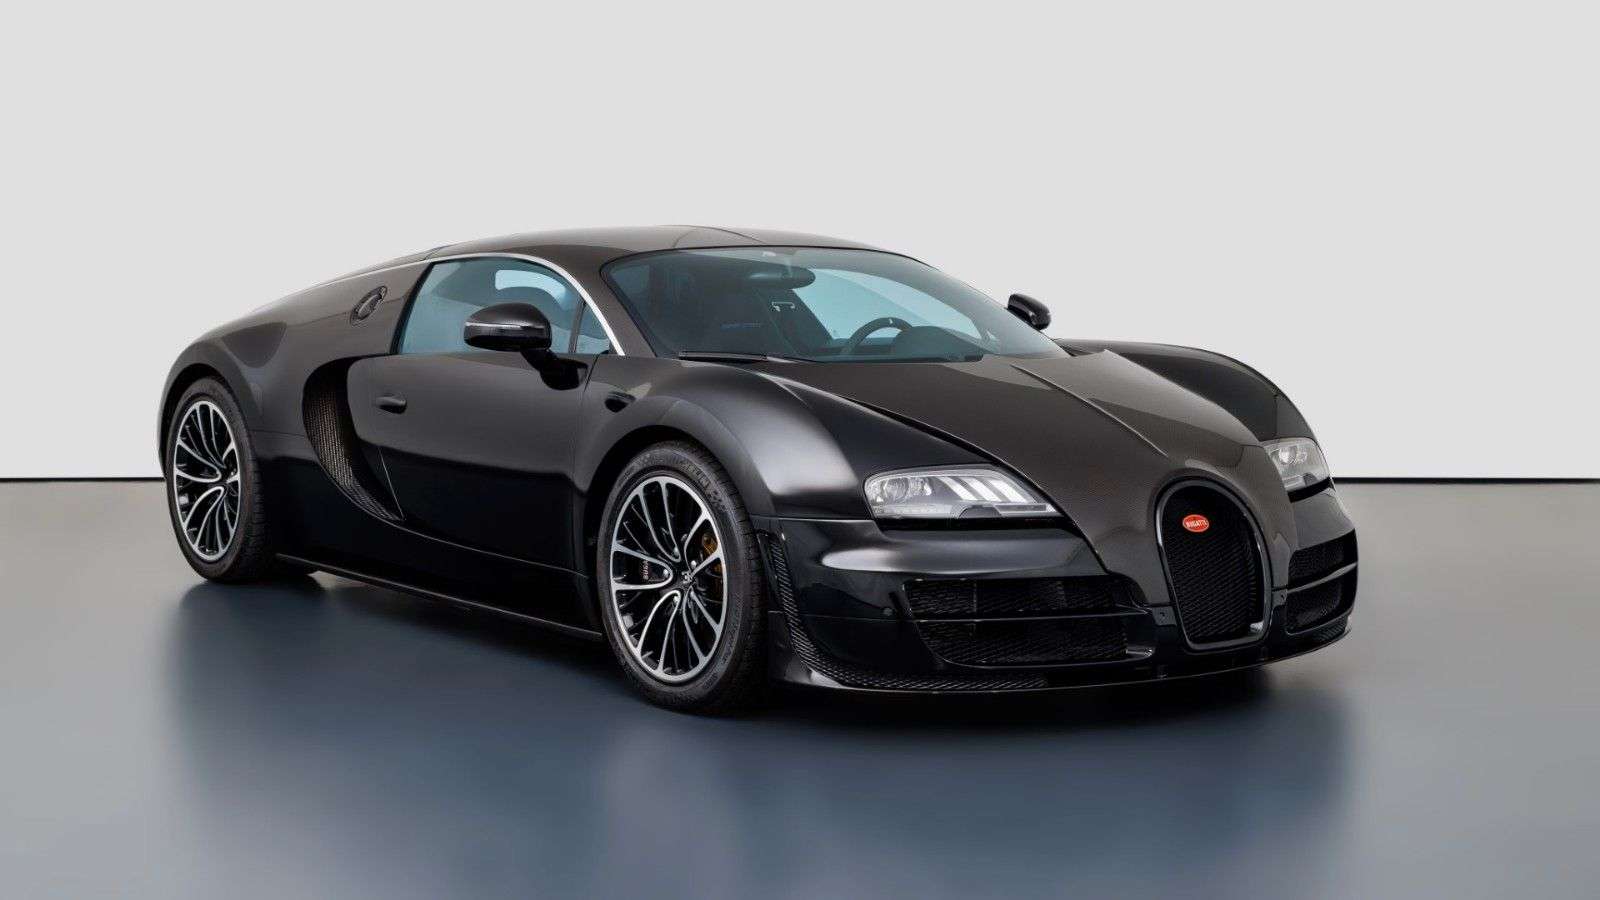 Bugatti Veyron Coupe in Black used in Pleidelsheim for € 3,094,000.-